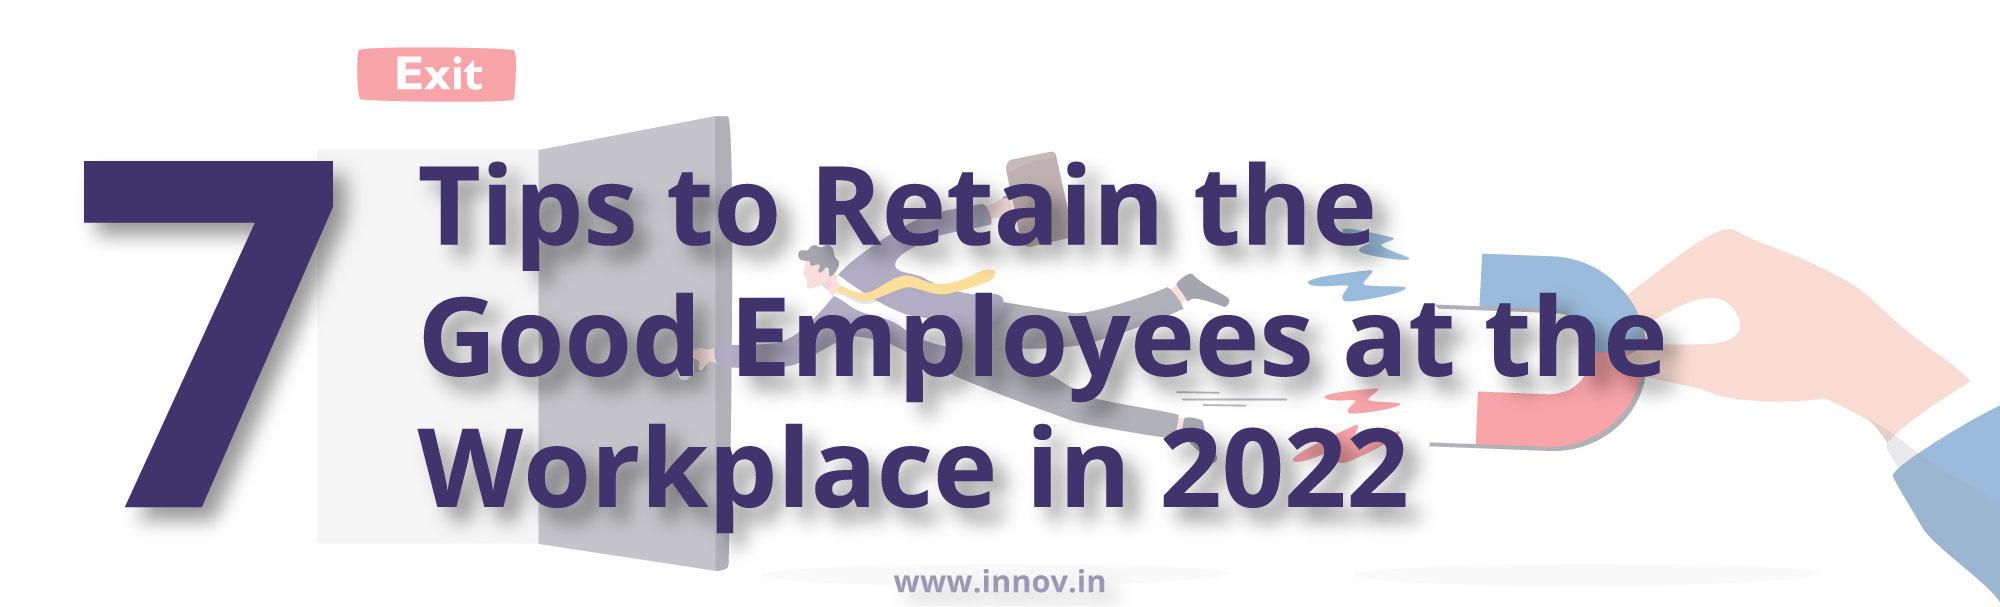 7 tips to retain good employees in the workplace in 2022